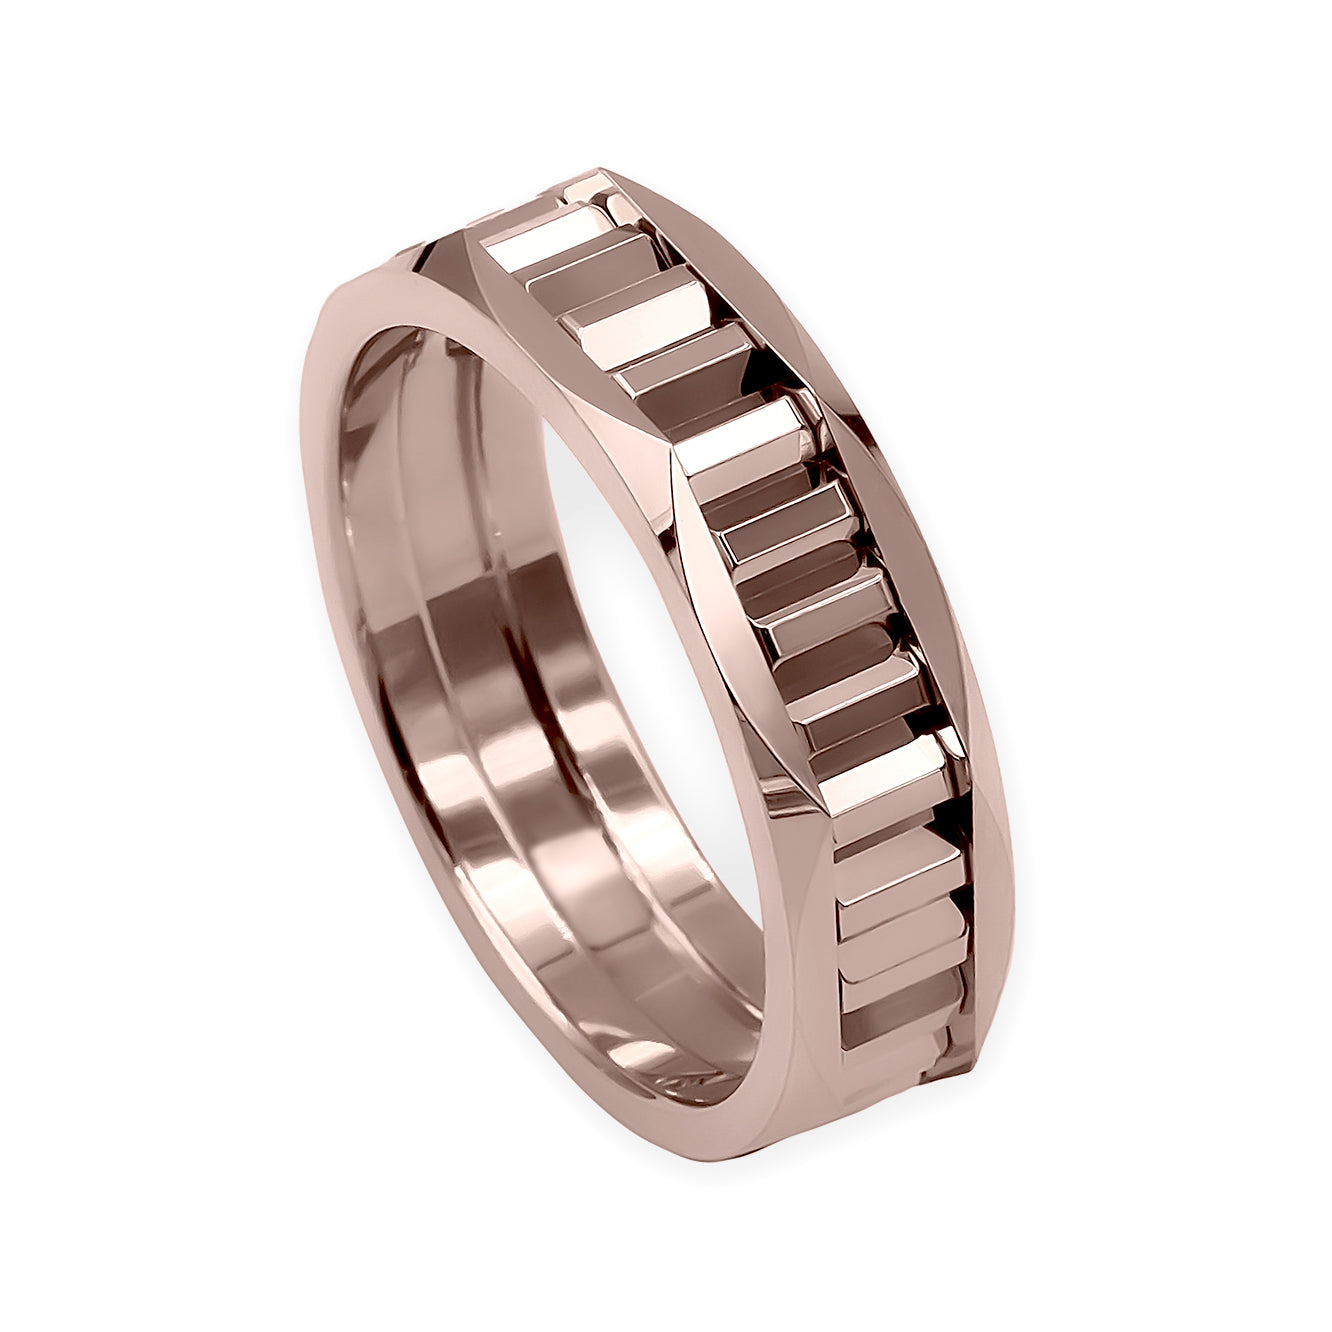 Ring CRUSH 6mm gears red gold 18k 750